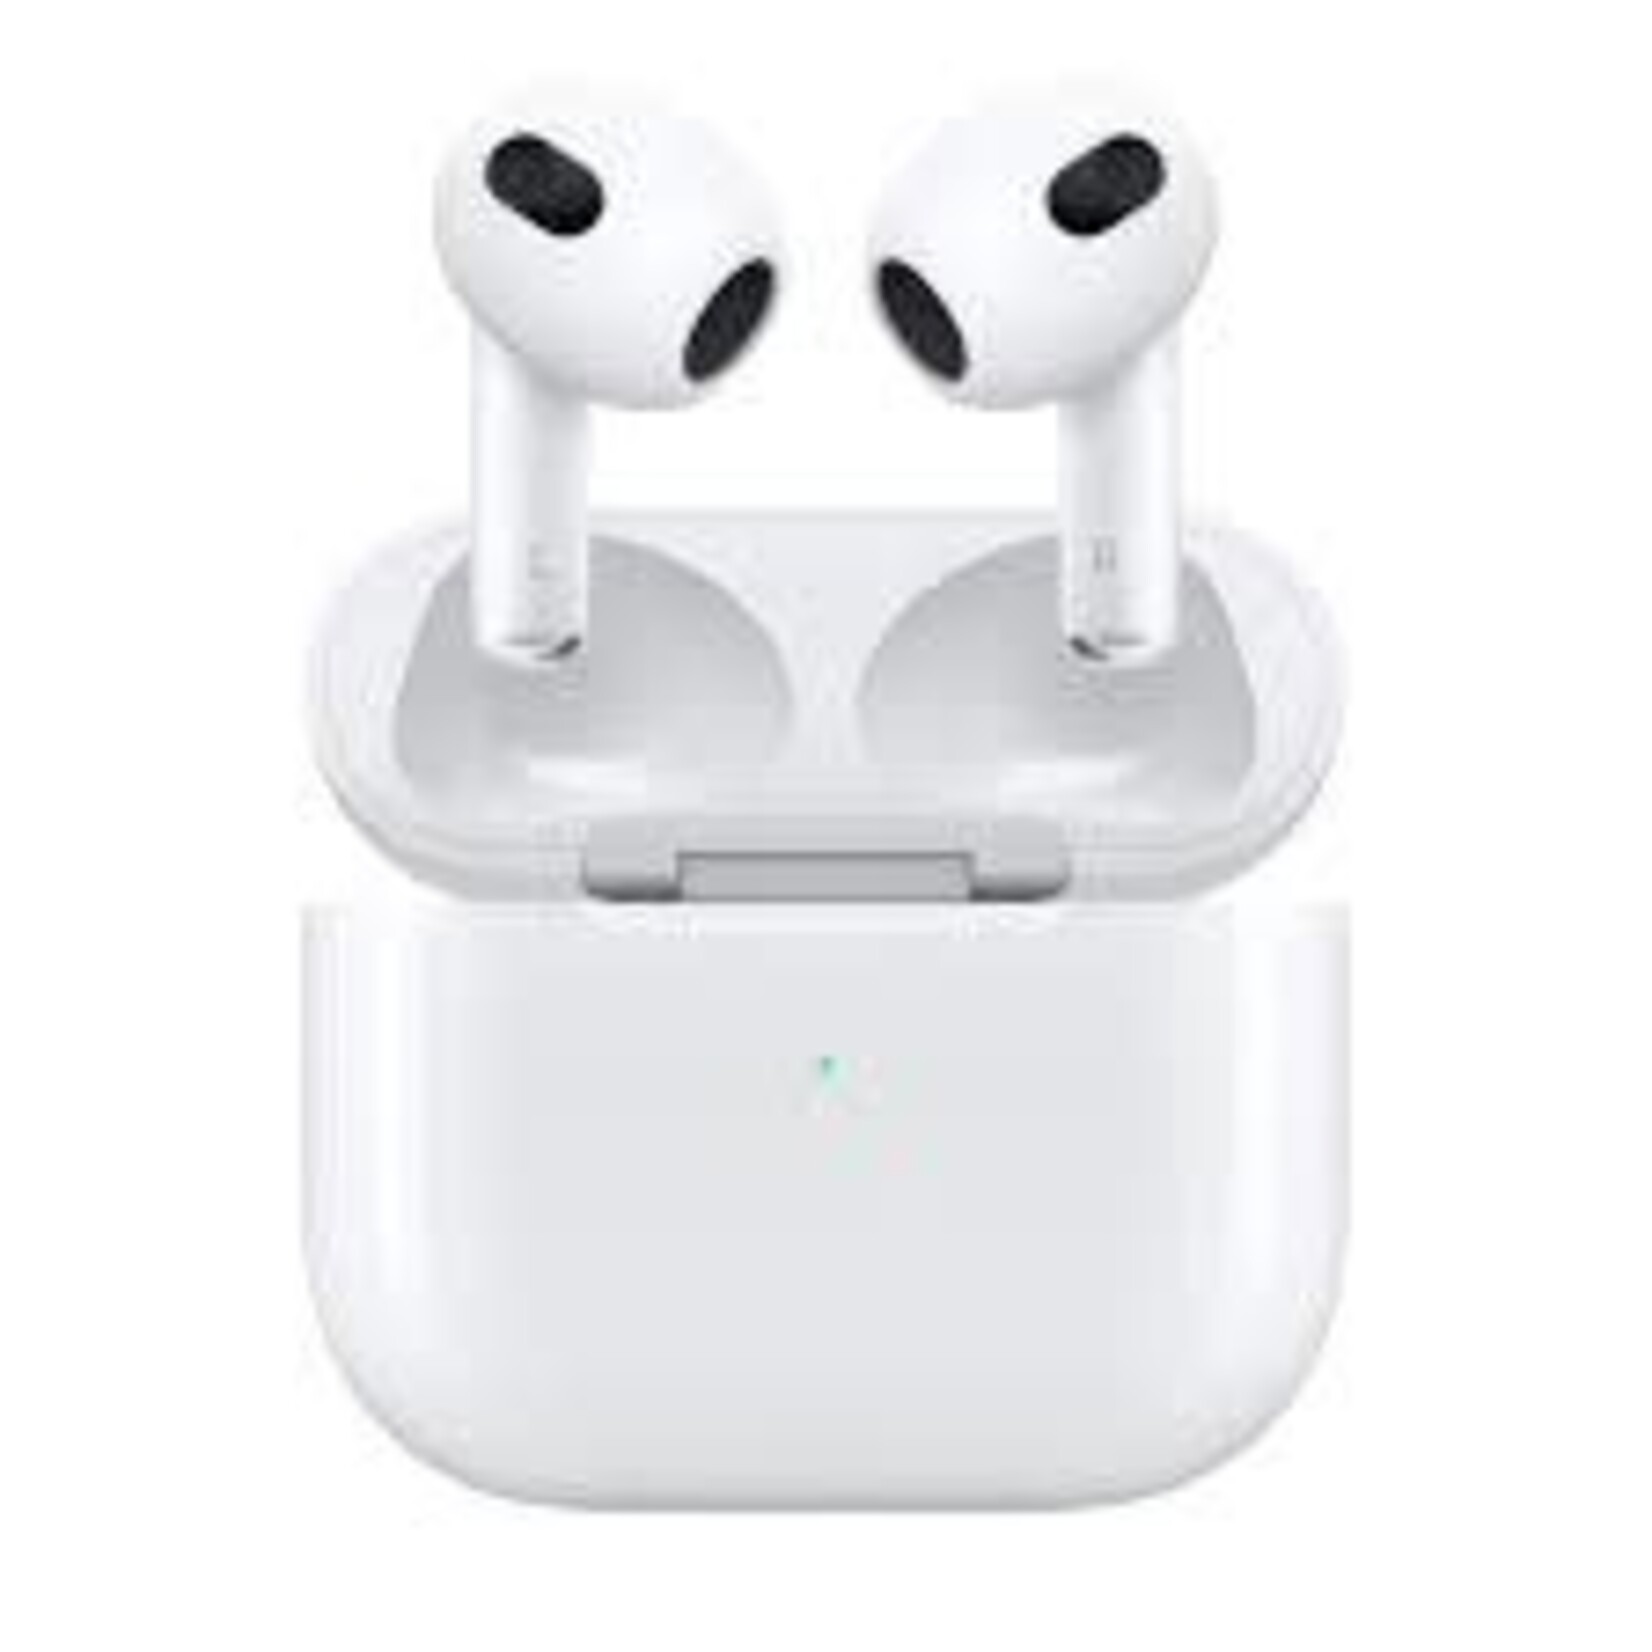 Apple Apple AirPods (3rd generation)